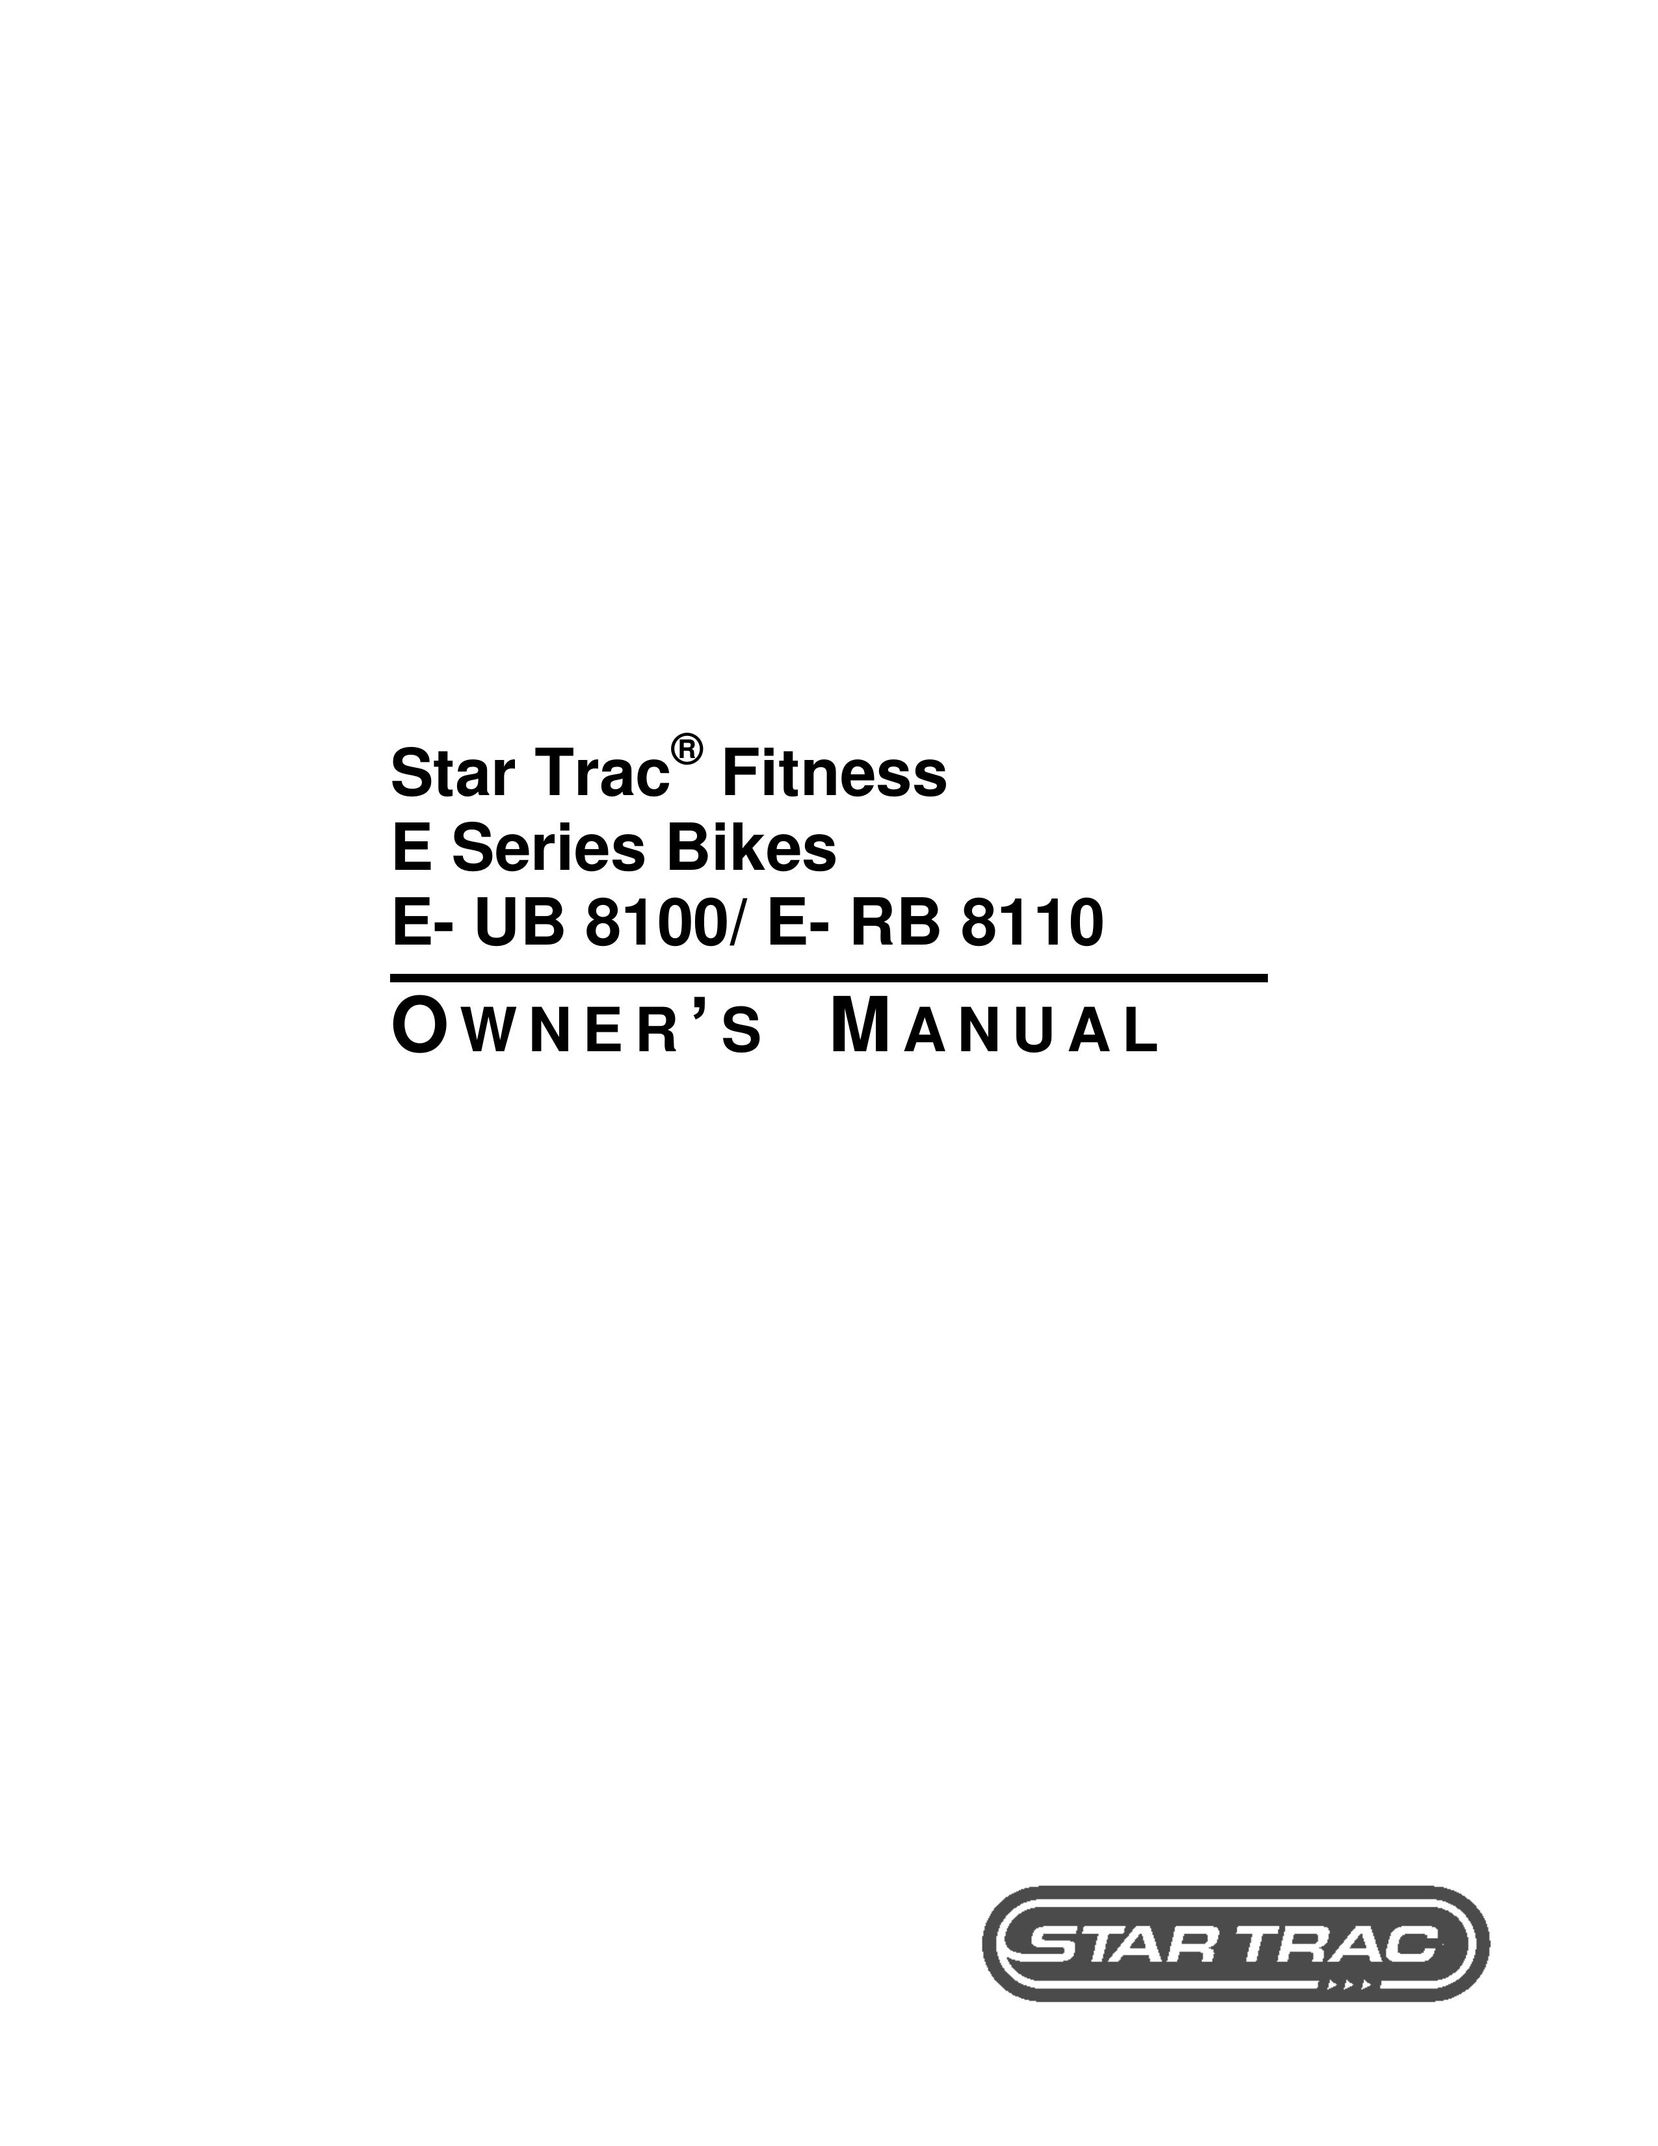 Star Trac E- RB 8110 Bicycle Accessories User Manual